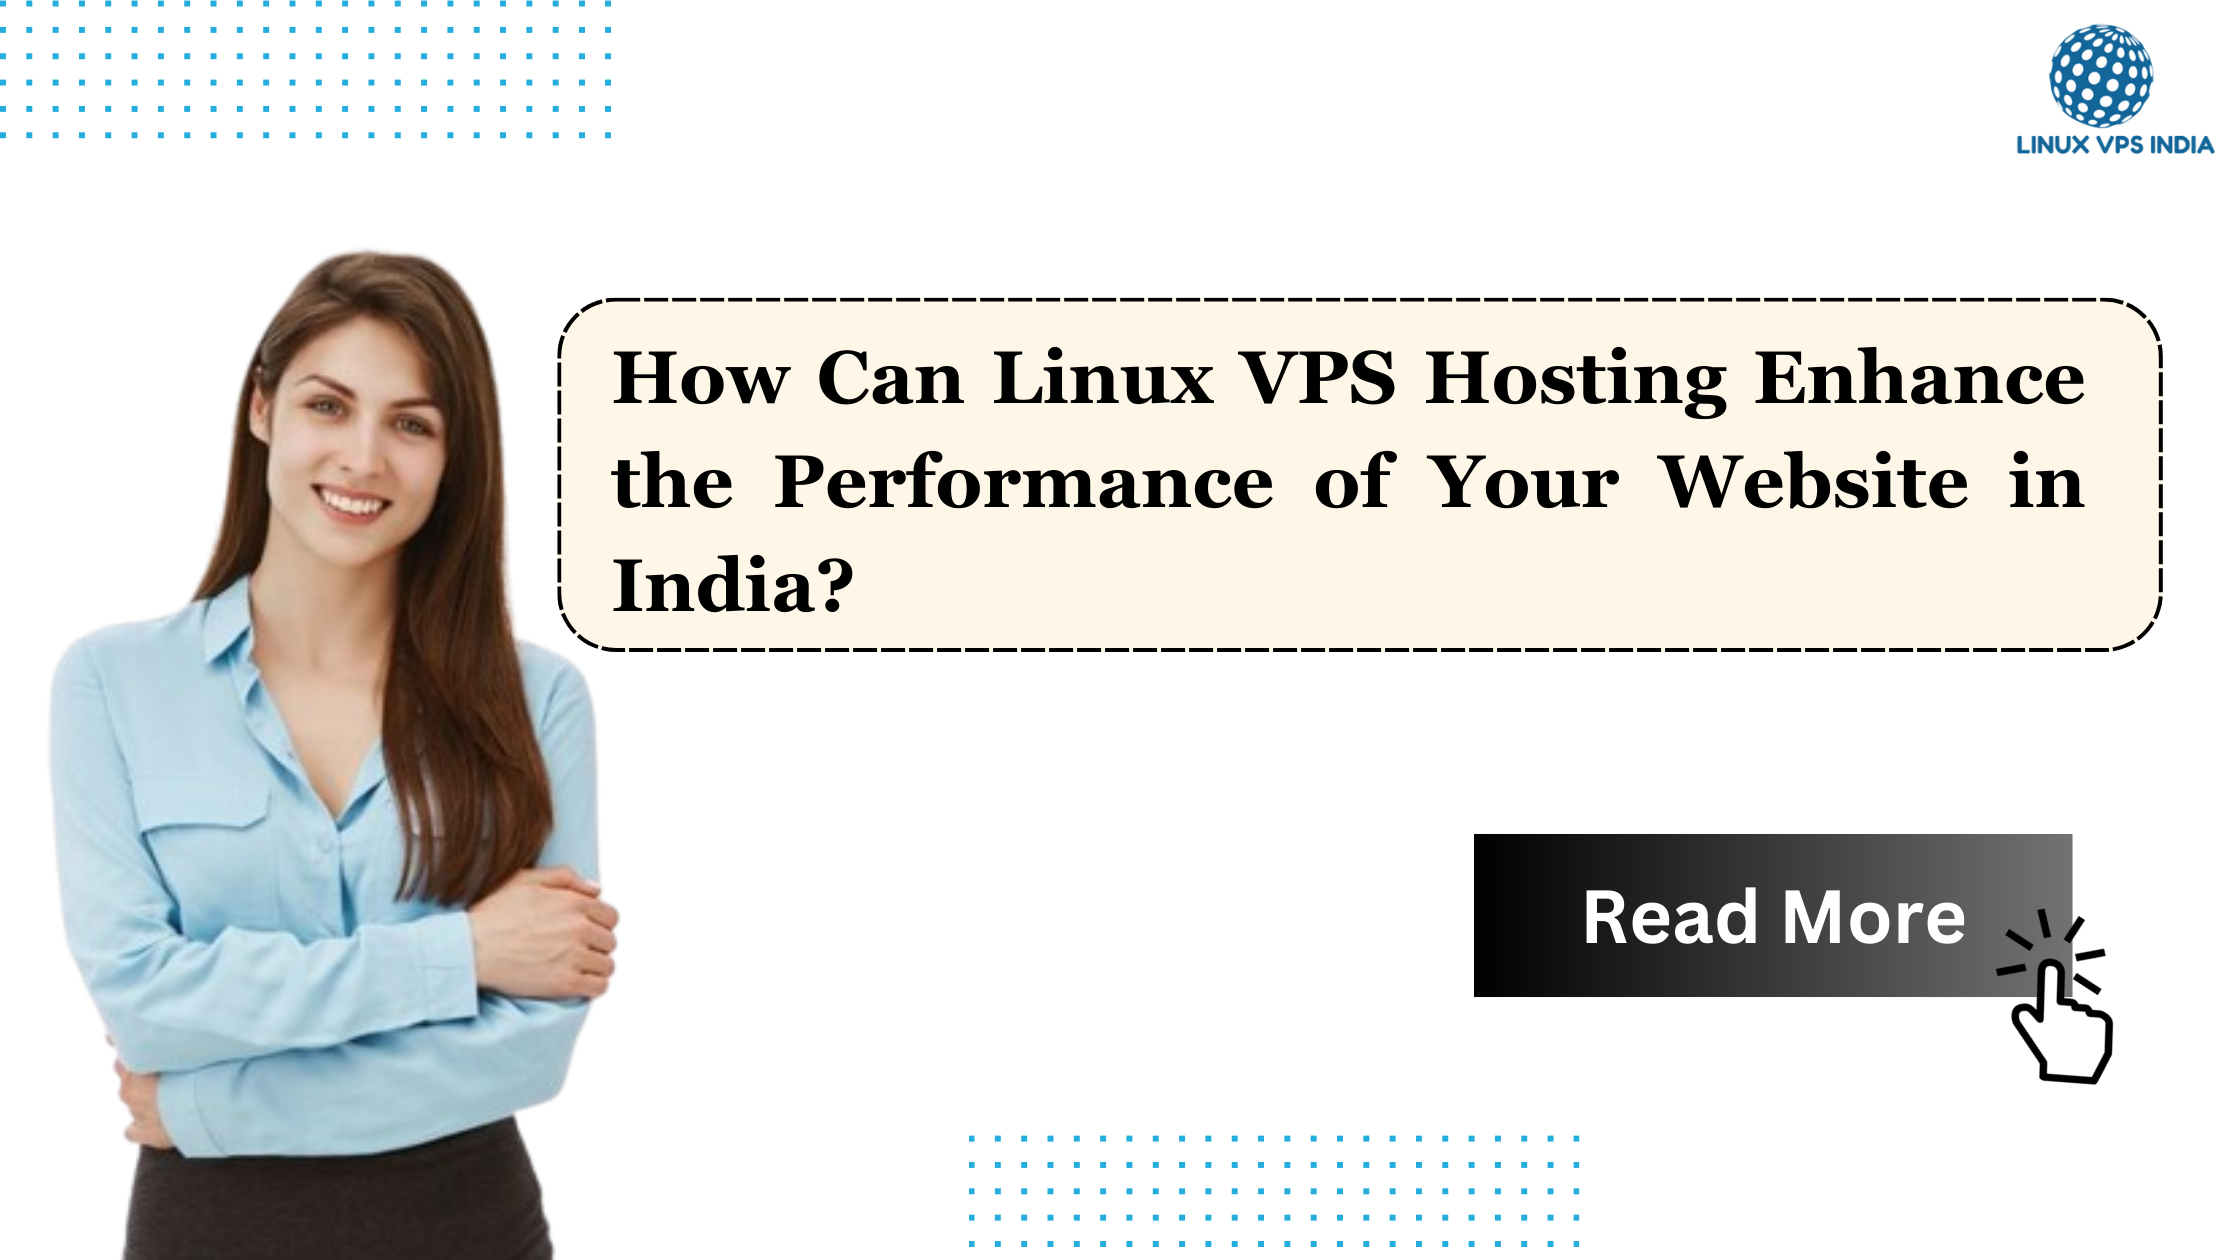 How Can Linux VPS Hosting Enhance the Performance of Your Website in India